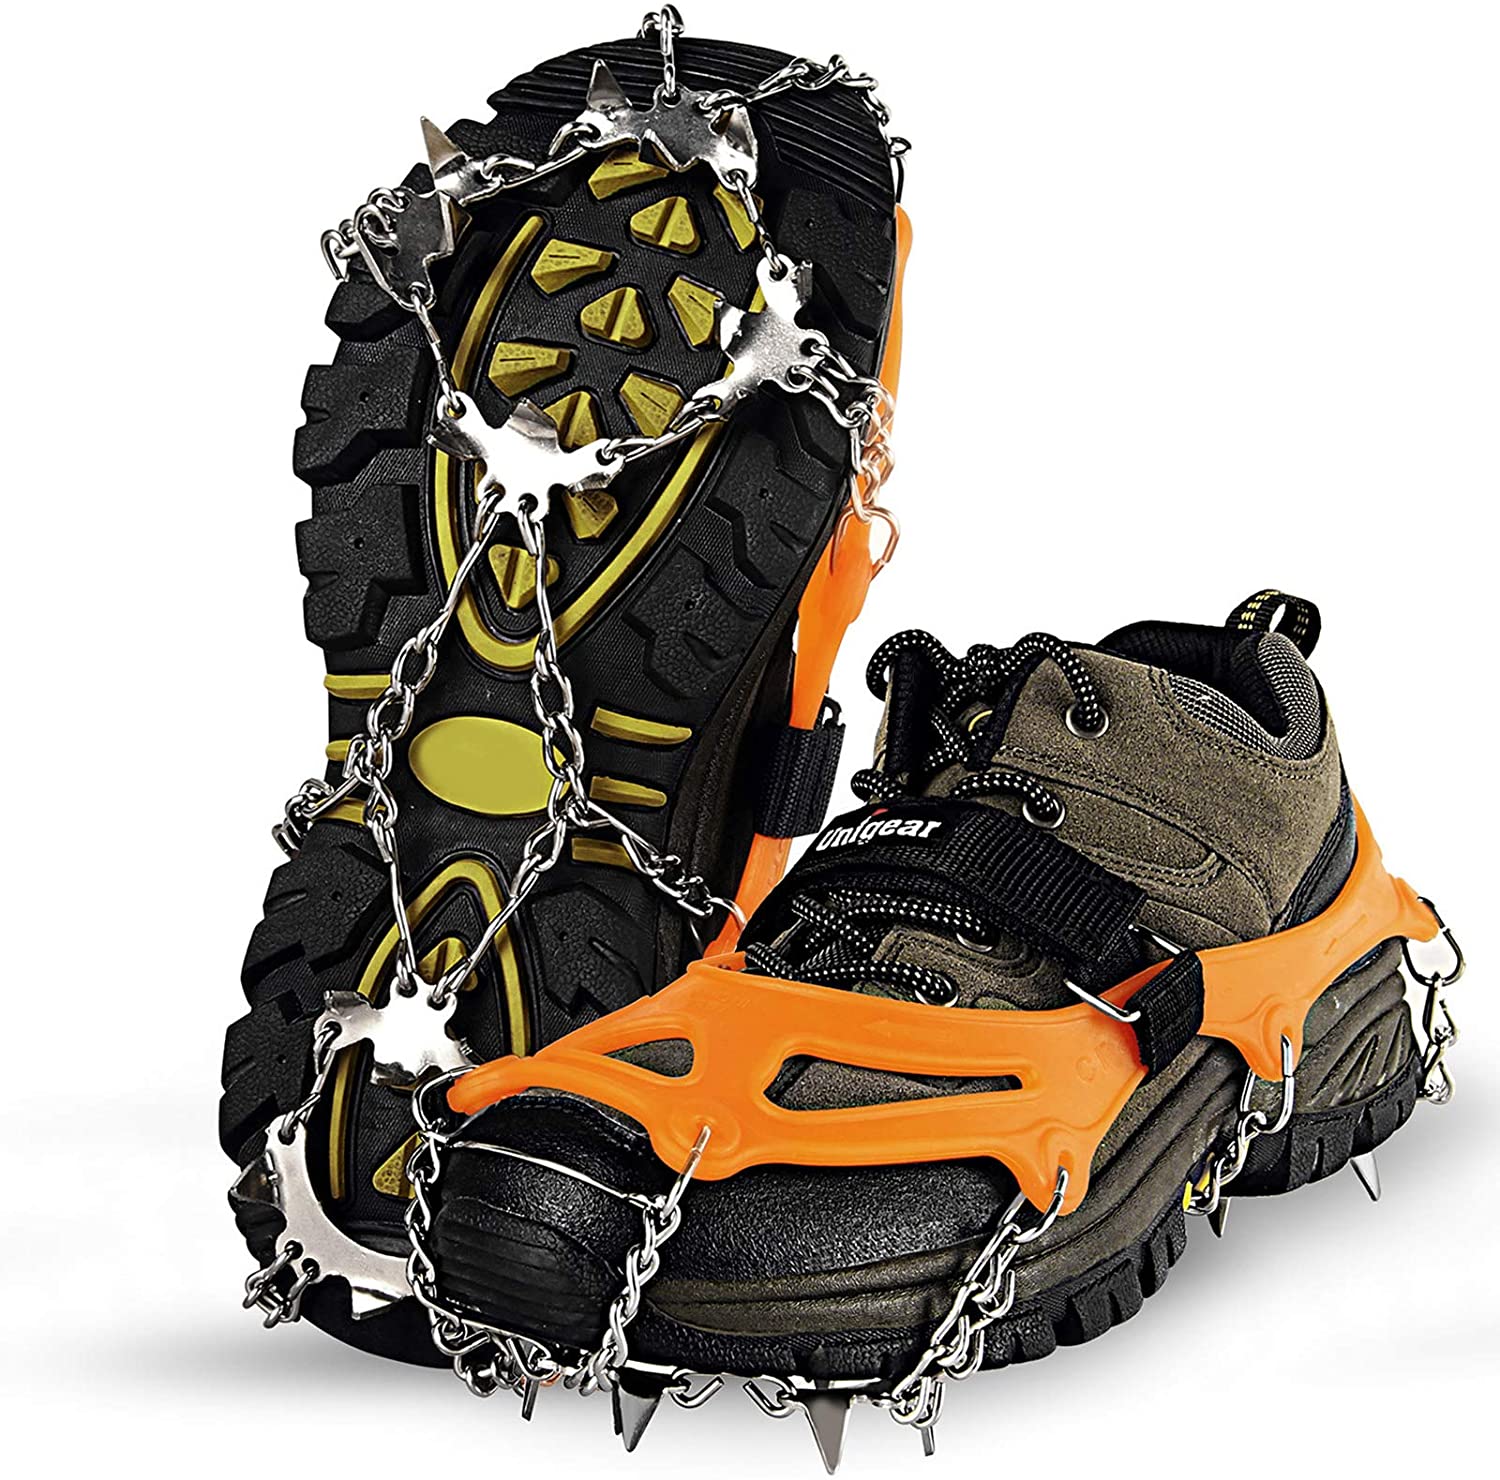 Climbing and Hiking on Snow Ice Win-digital Traction Cleats,Crampon for Walking Jogging 